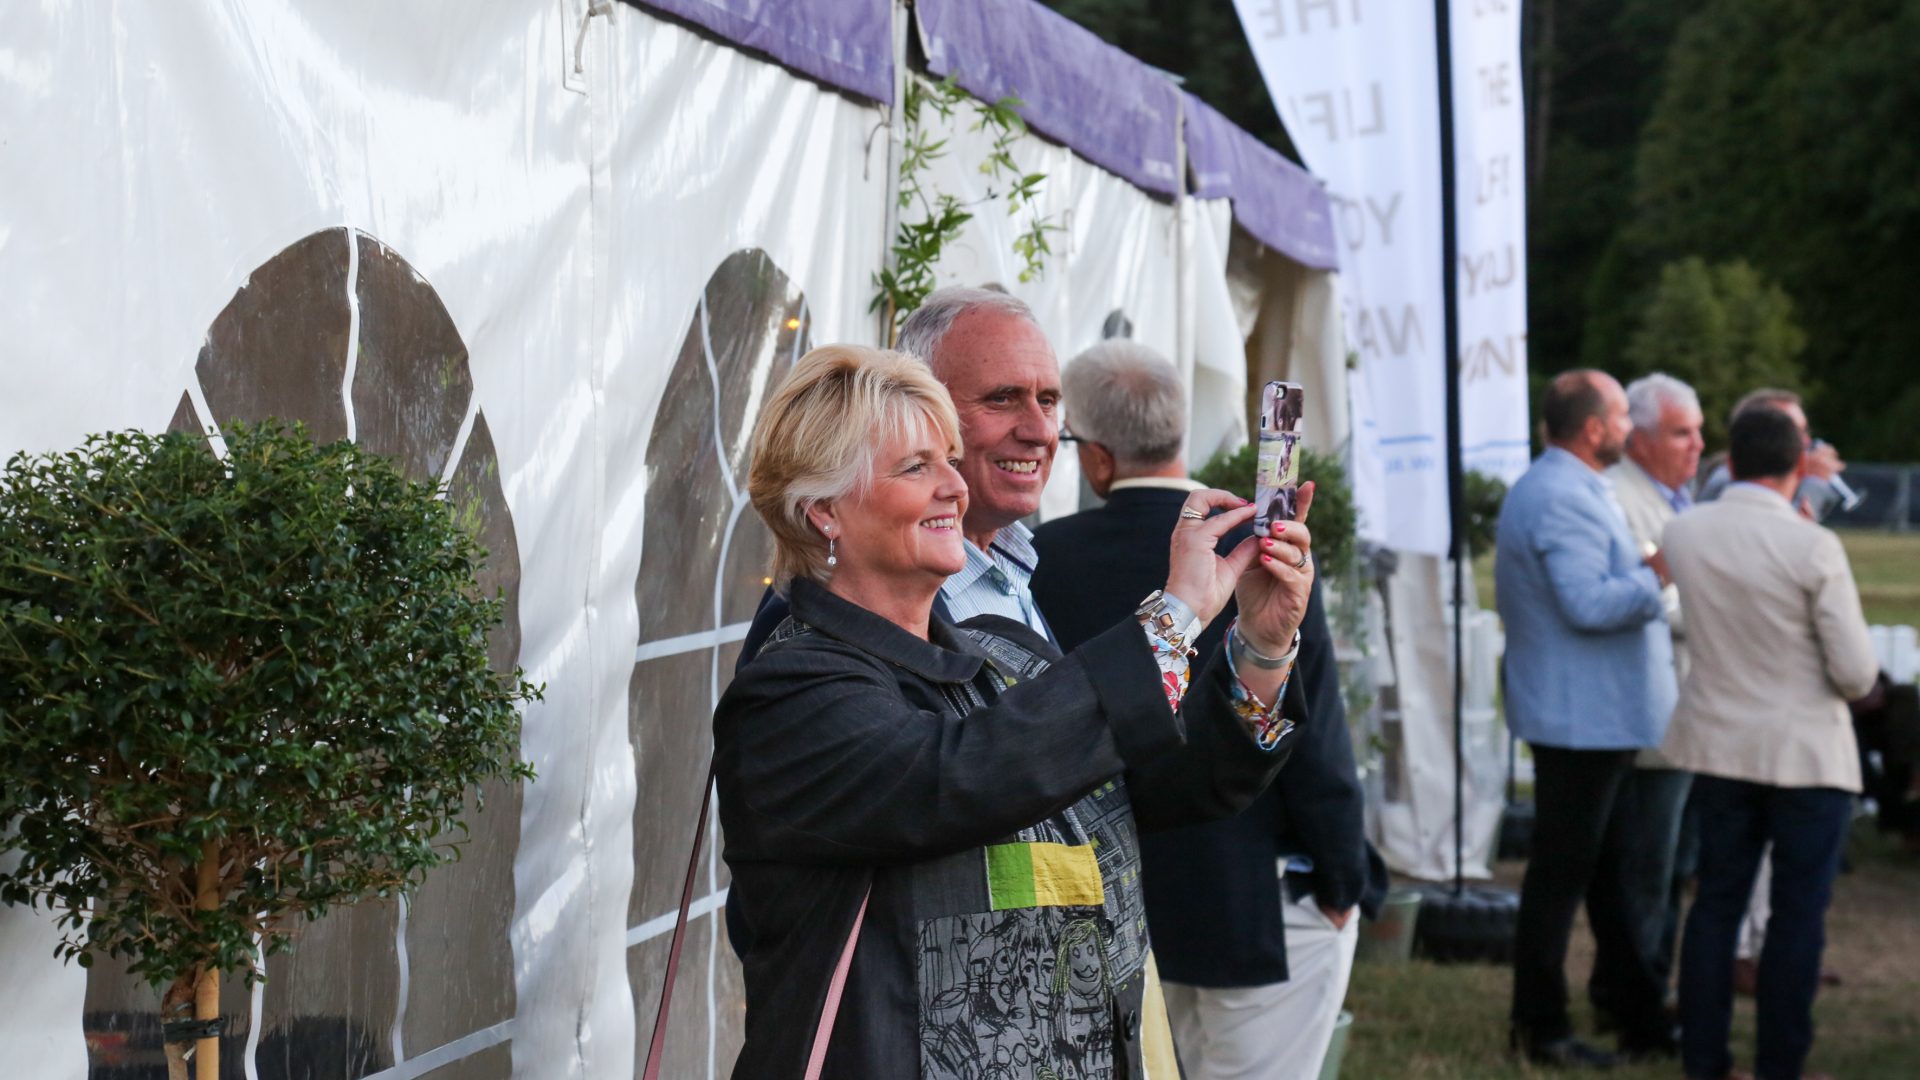 Two guests take a photo in front of the Corporate Guests marquee at the BSO Proms in the Park, which aims to enterain and impress other guests.